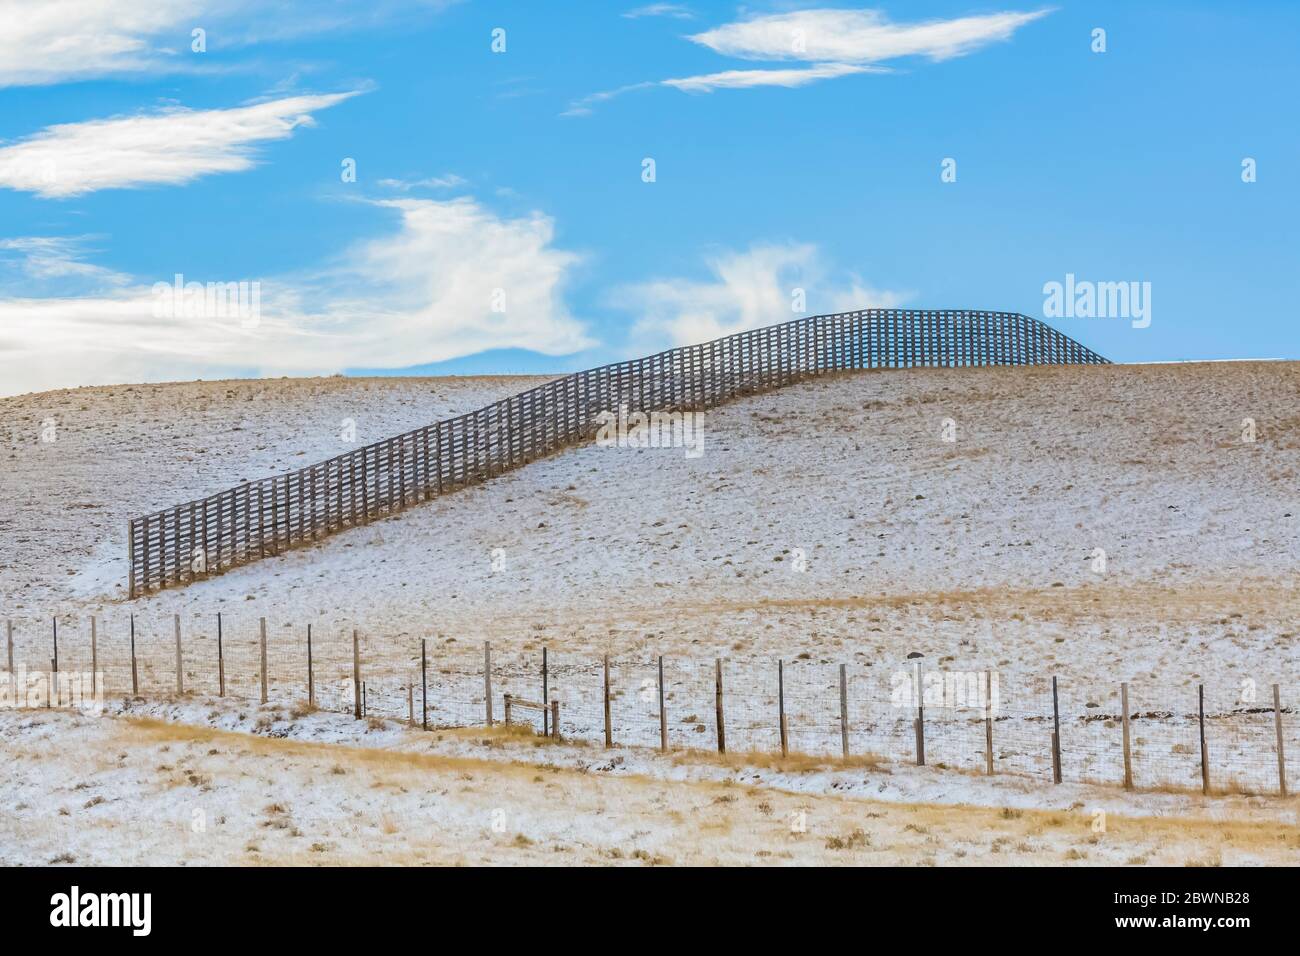 Snow fences placed to catch drifting snow and keep it off Interstate 80 in Wyoming, USA Stock Photo